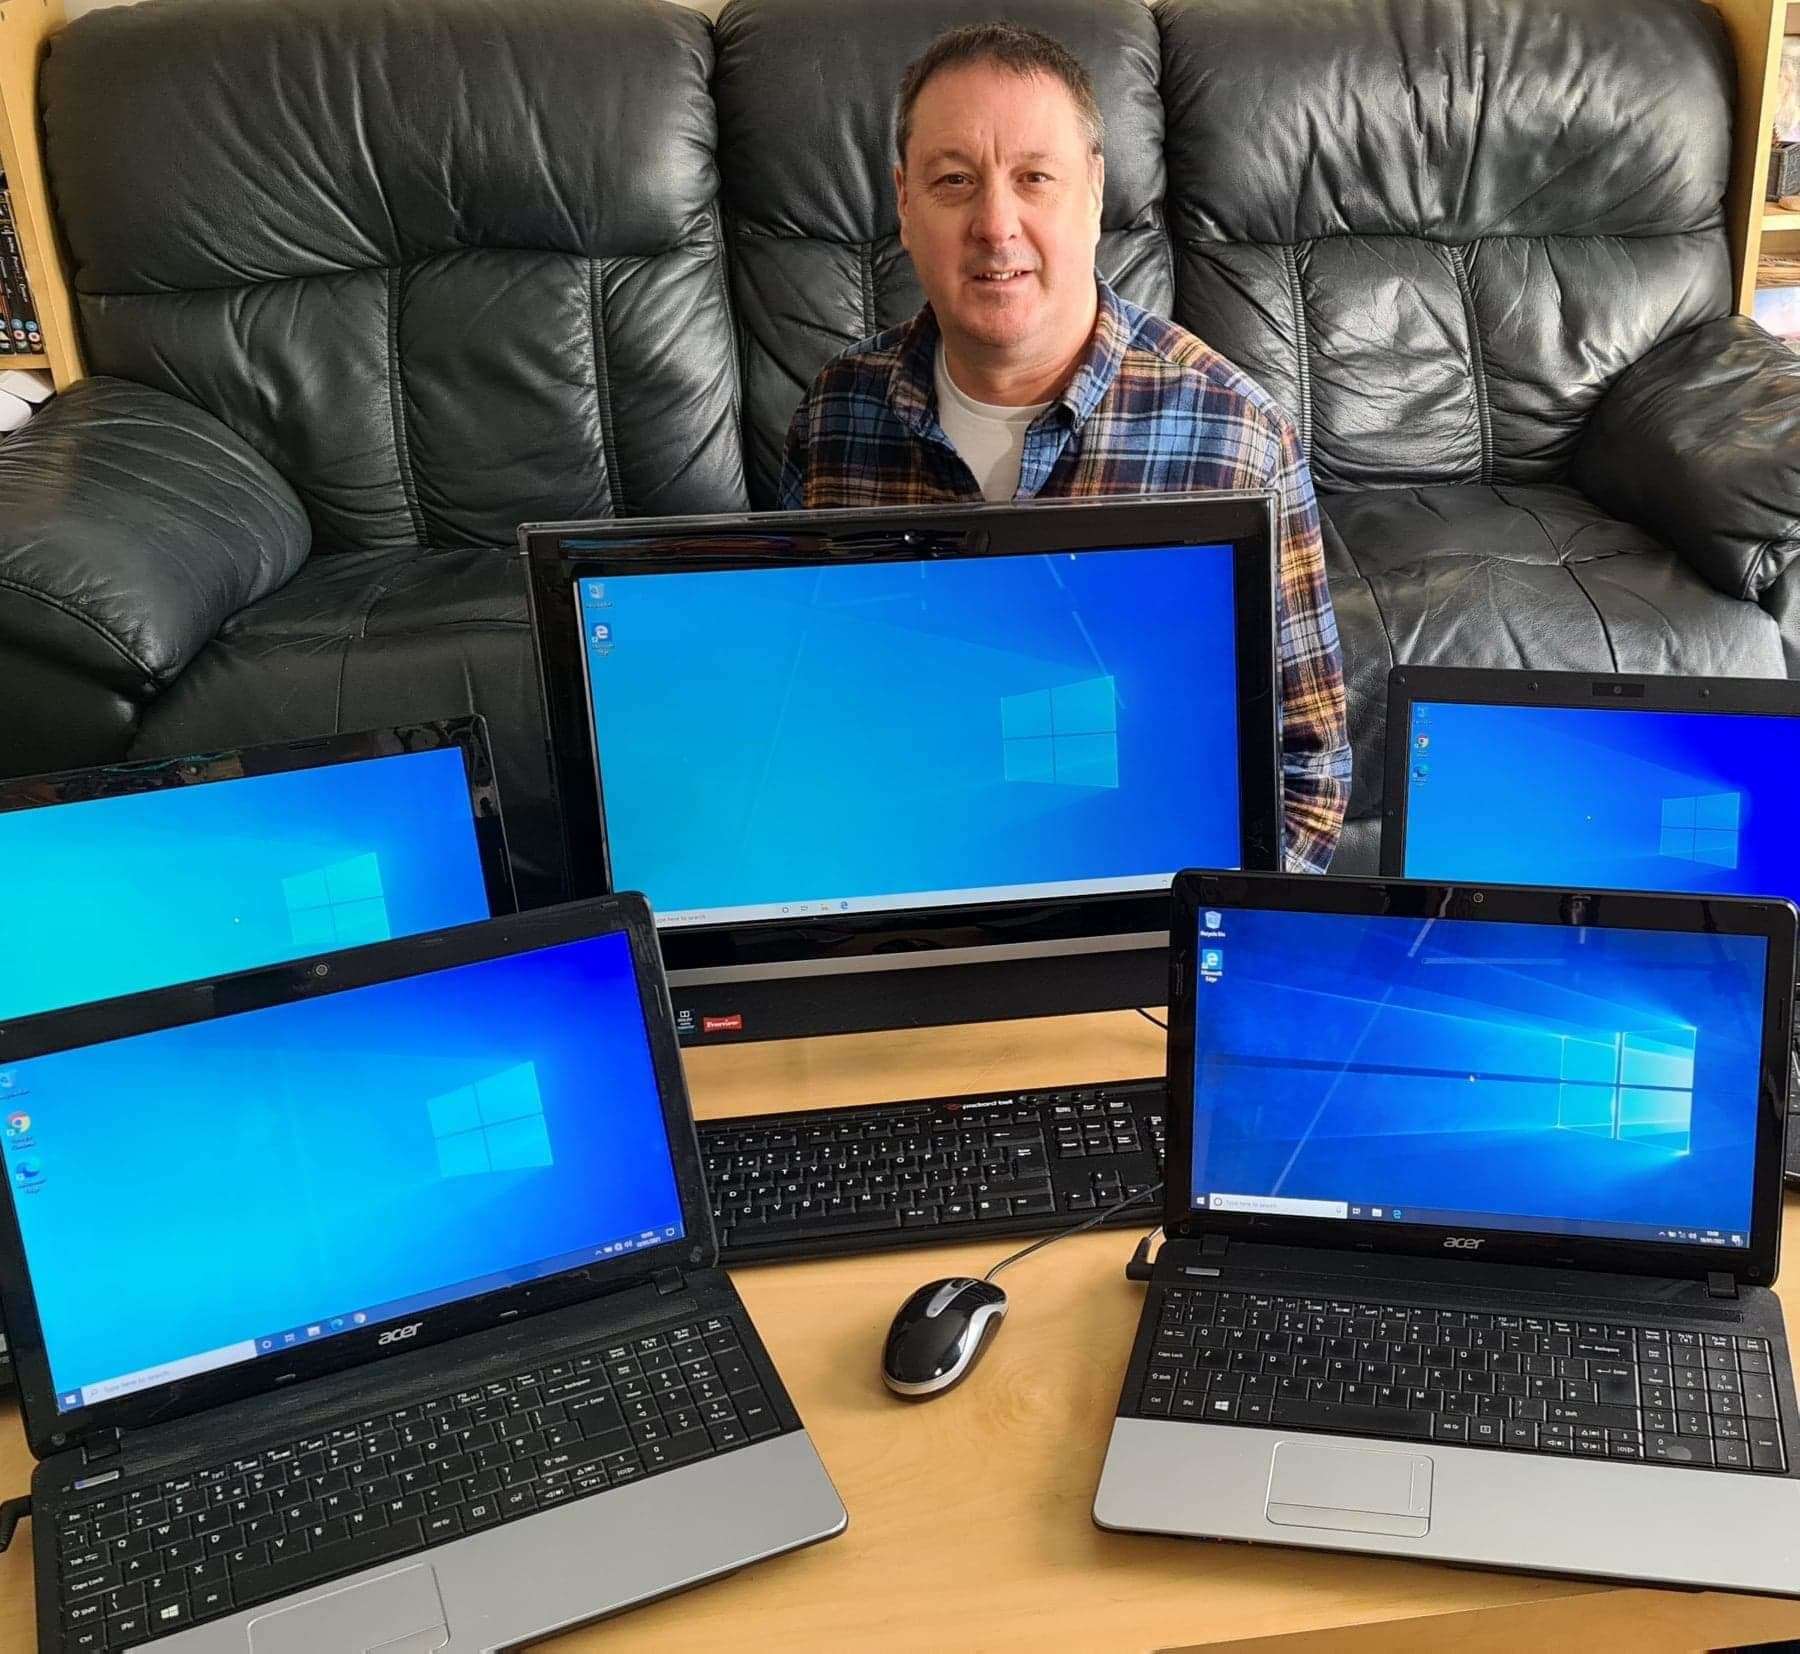 Dartford resident Paul Williams has been donating his time to get the laptops ready for school kids in need.